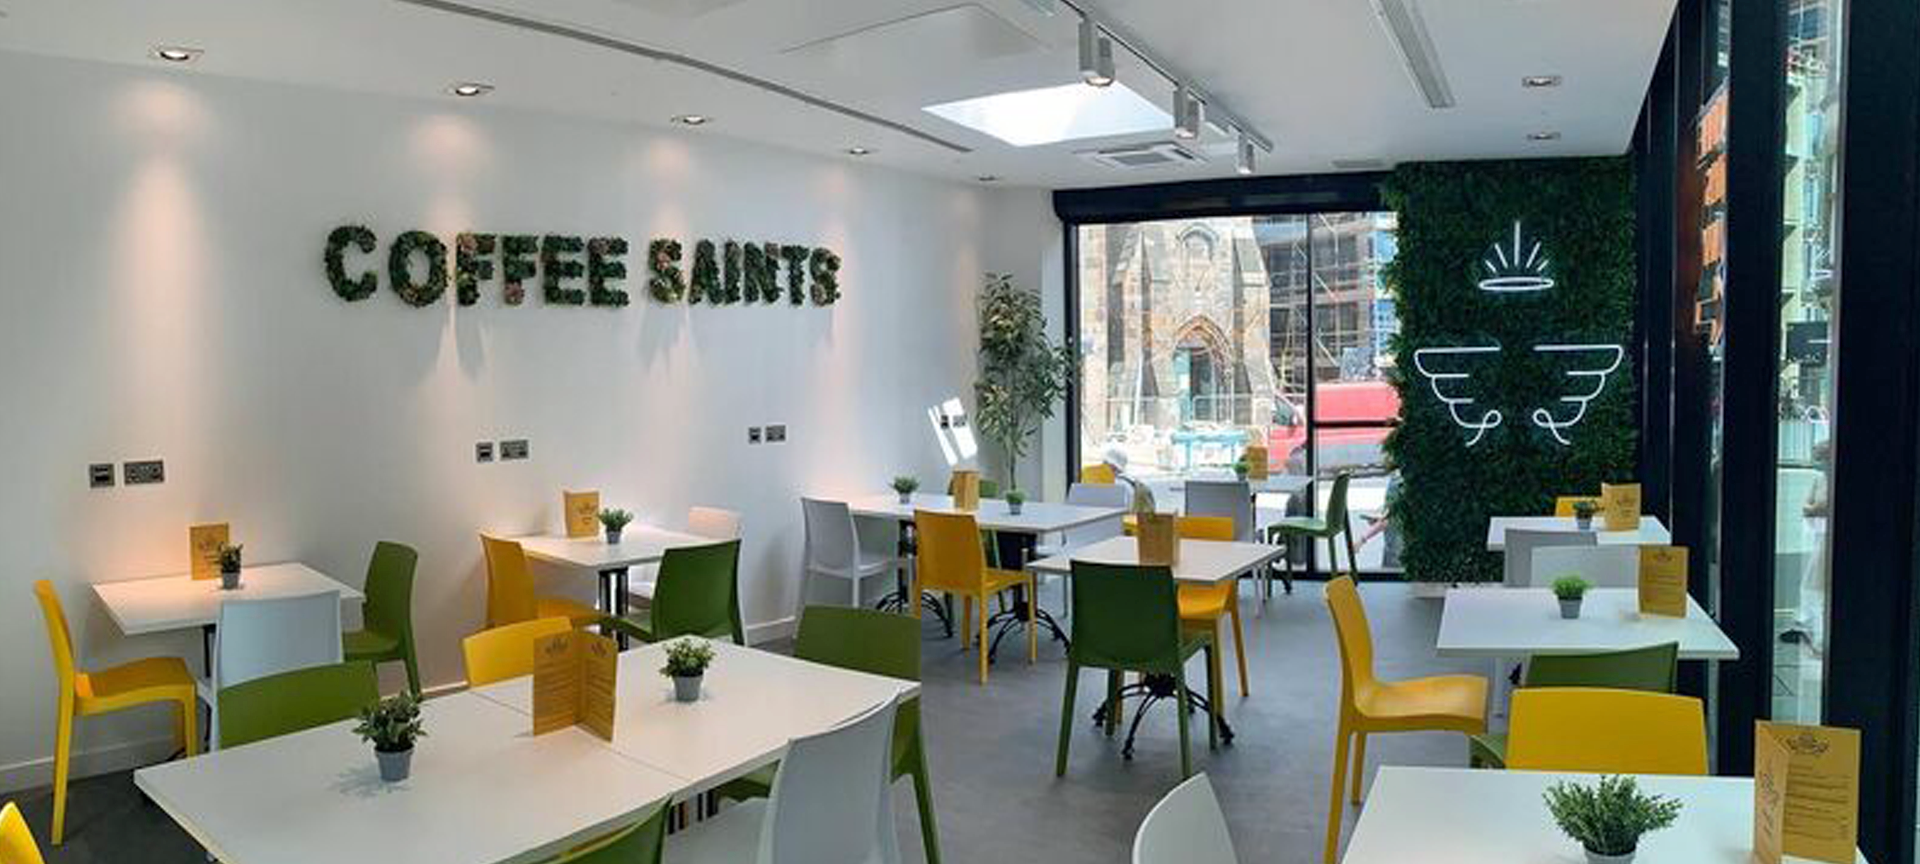 <p>Inside the new Coffee Saints cafe in the Grassmarket.</p>
